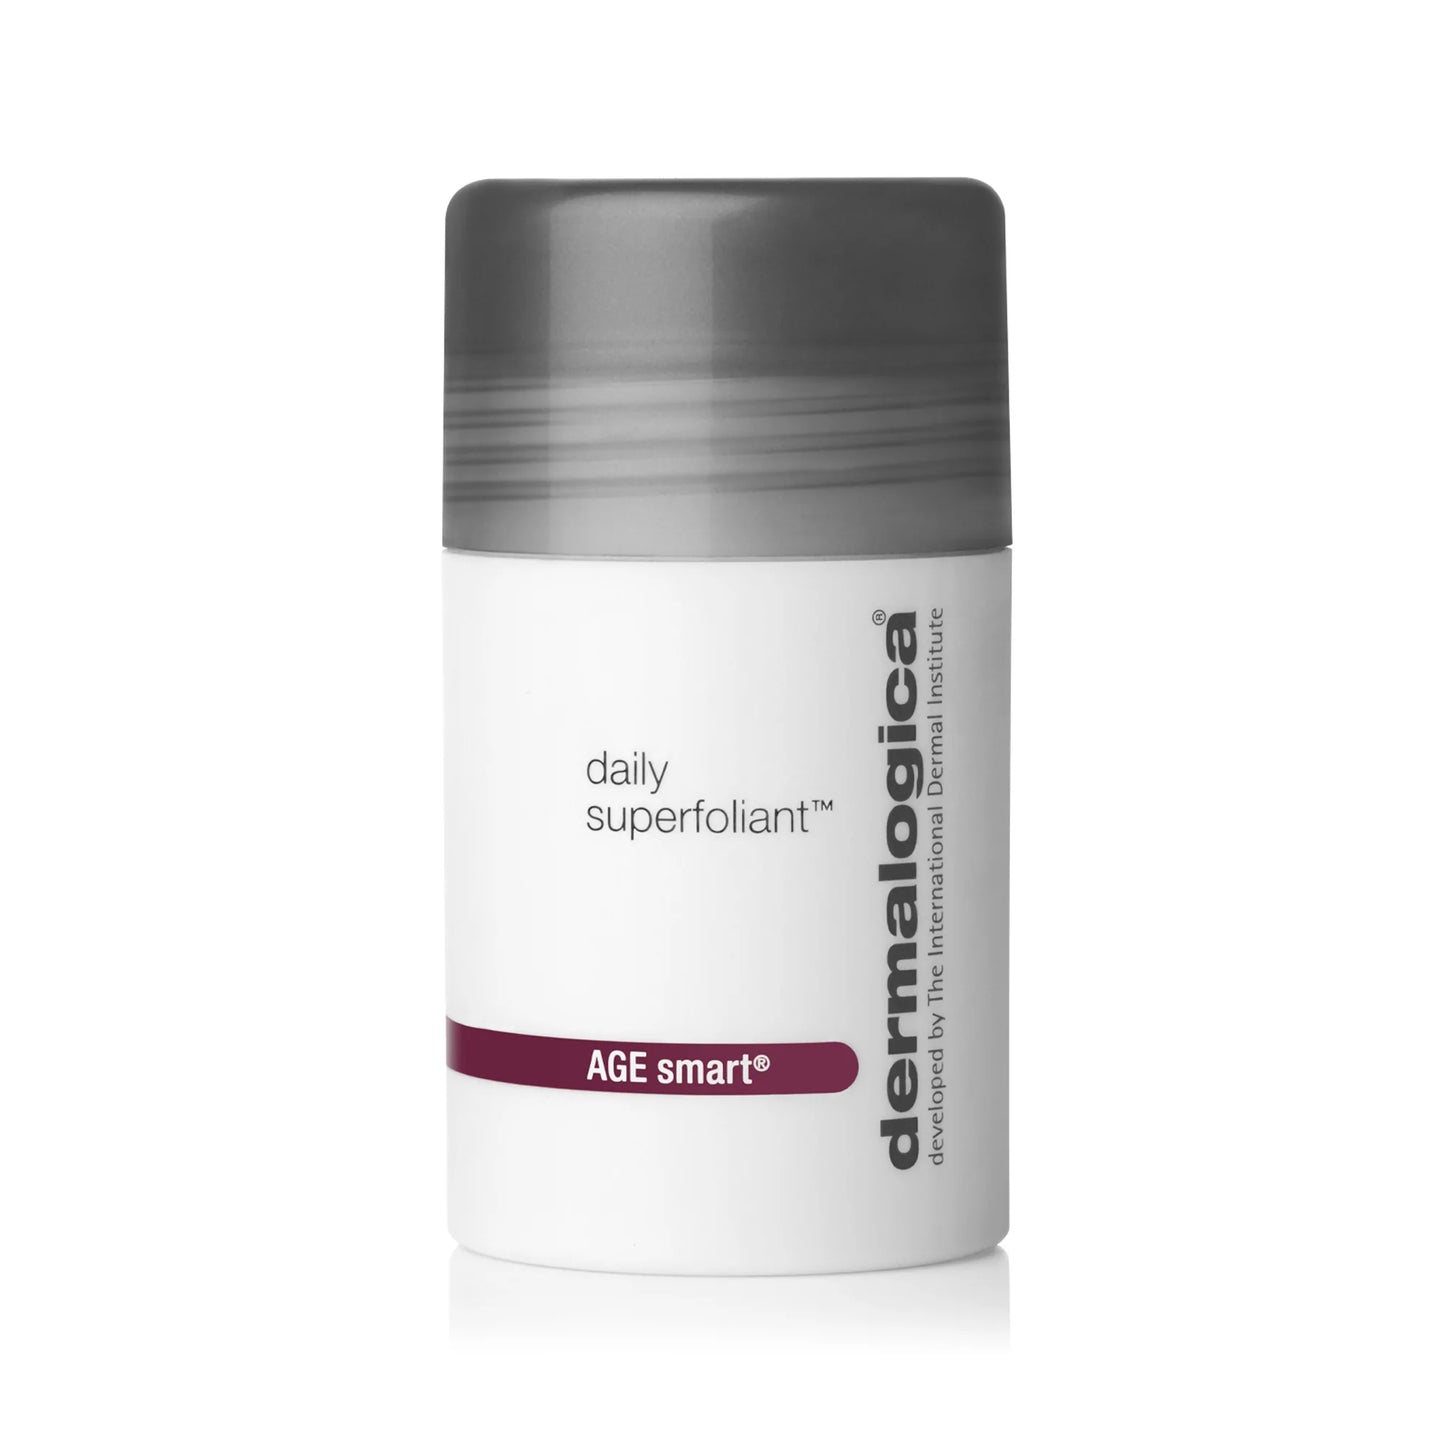 dermalogica daily superfoliant travel size 13g